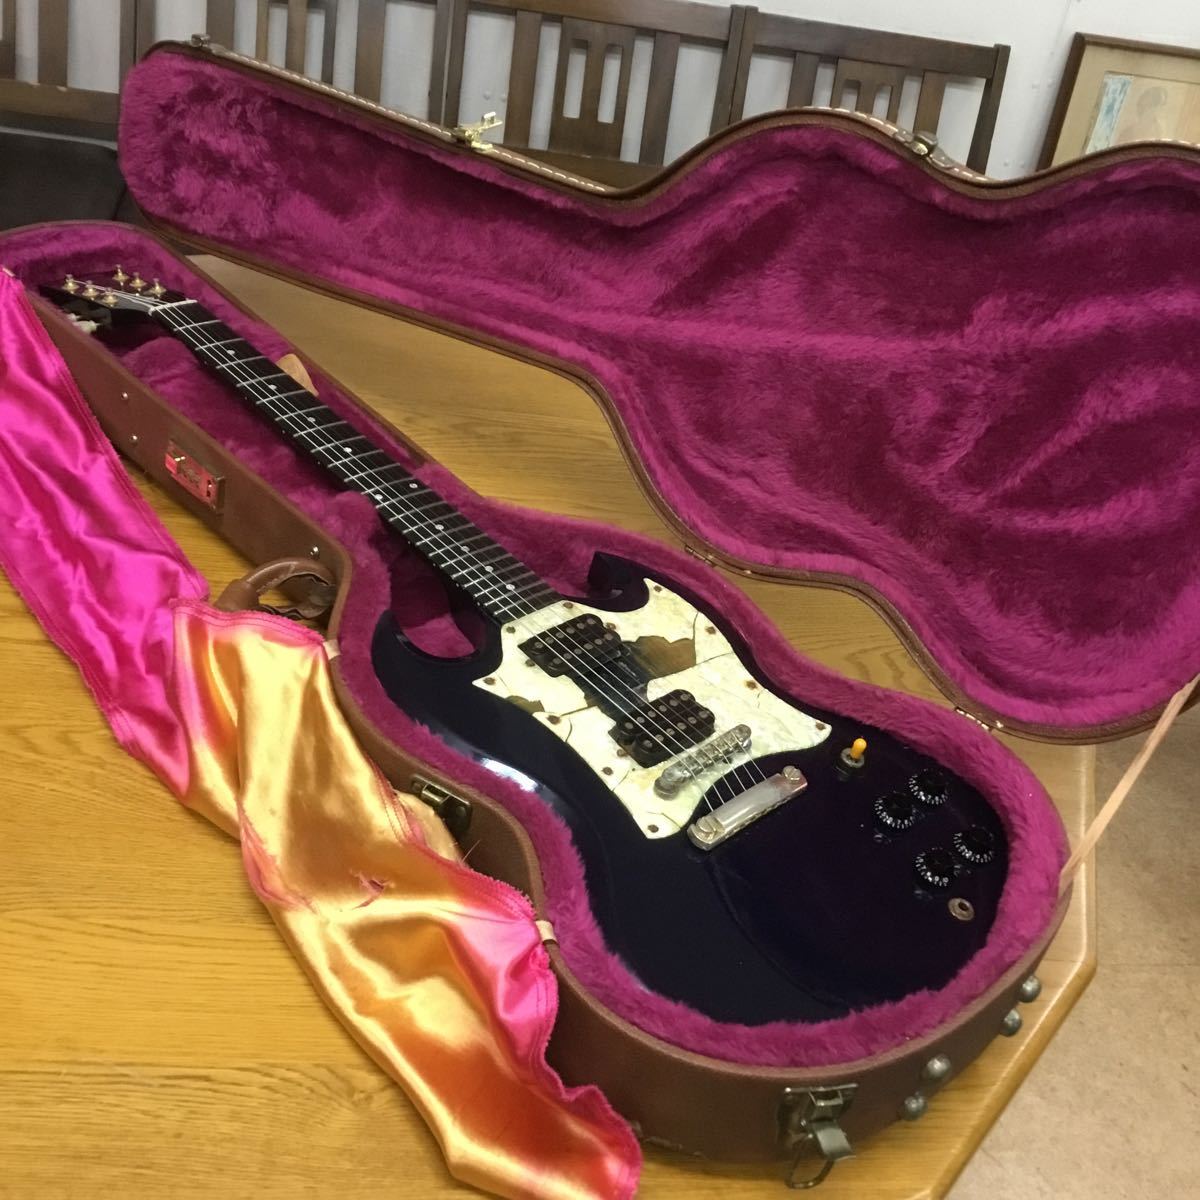 1995 GIBSON SG SPECIAL LIMITED EDITION ・エボニー・ハードケース_画像1